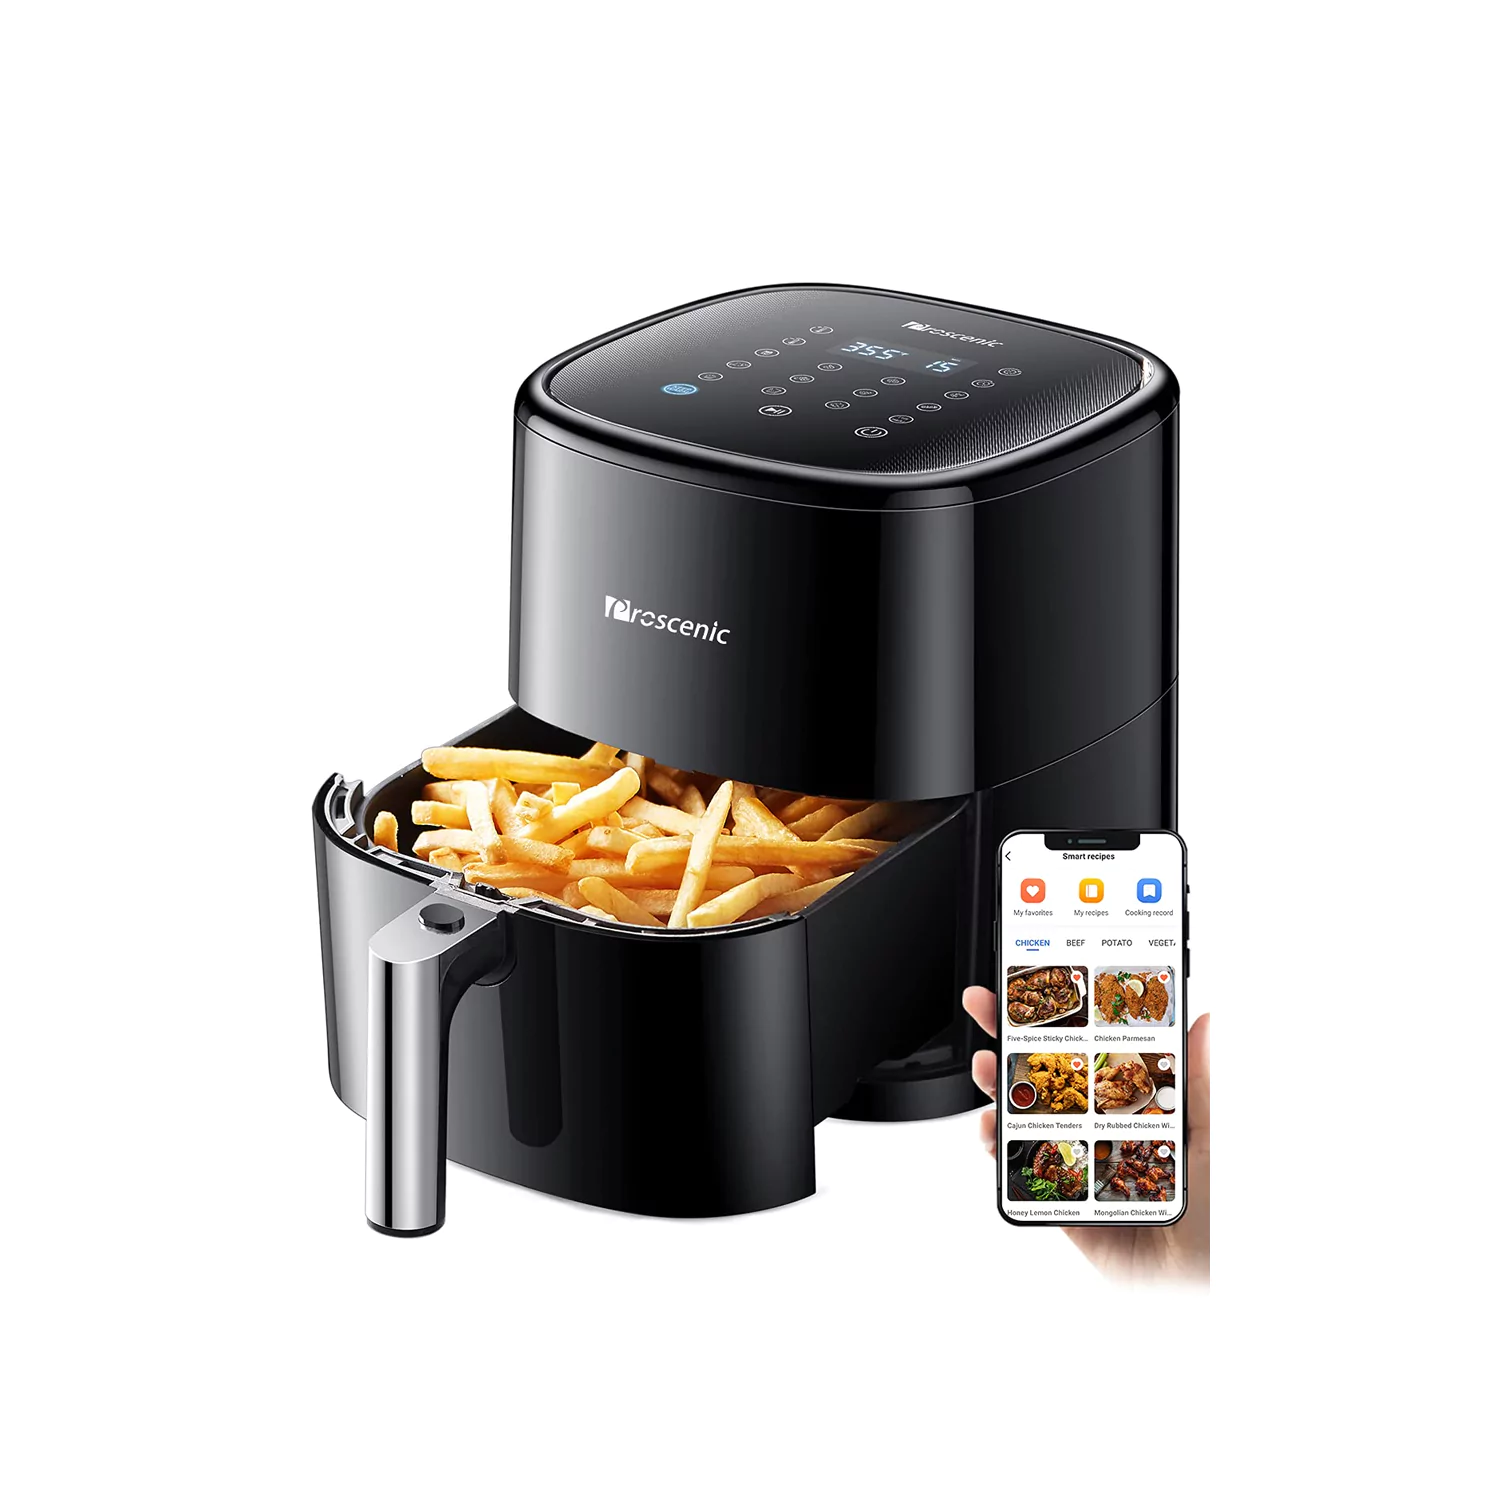 Proscenic T22 Air Fryer: Price, Specifications, and Comparisons